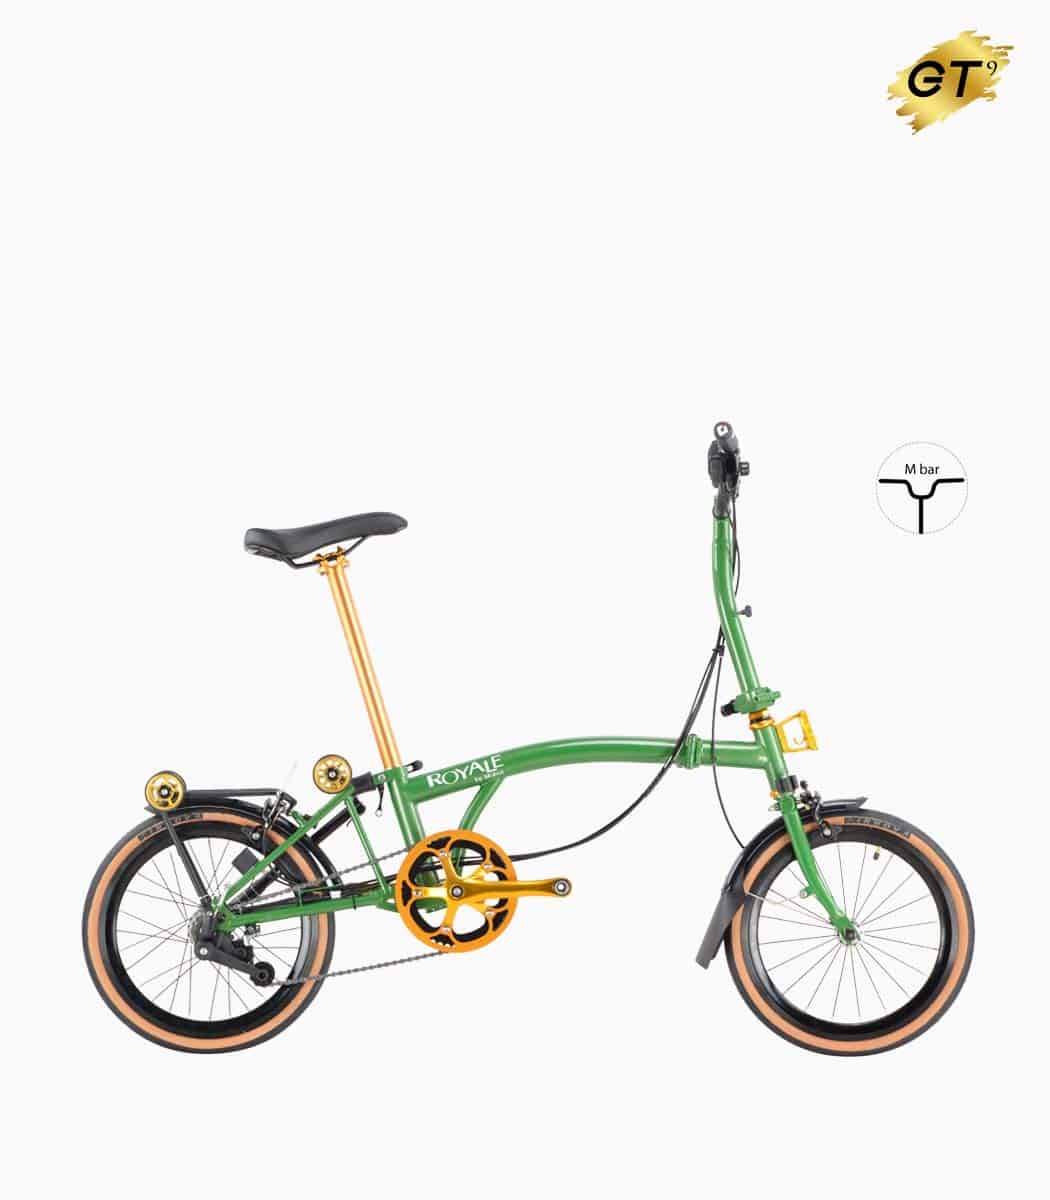 MOBOT ROYALE GT M9 (HUNTER GREEN) foldable bicycle gold edition M-bar with tanwall tyres high profile rim right